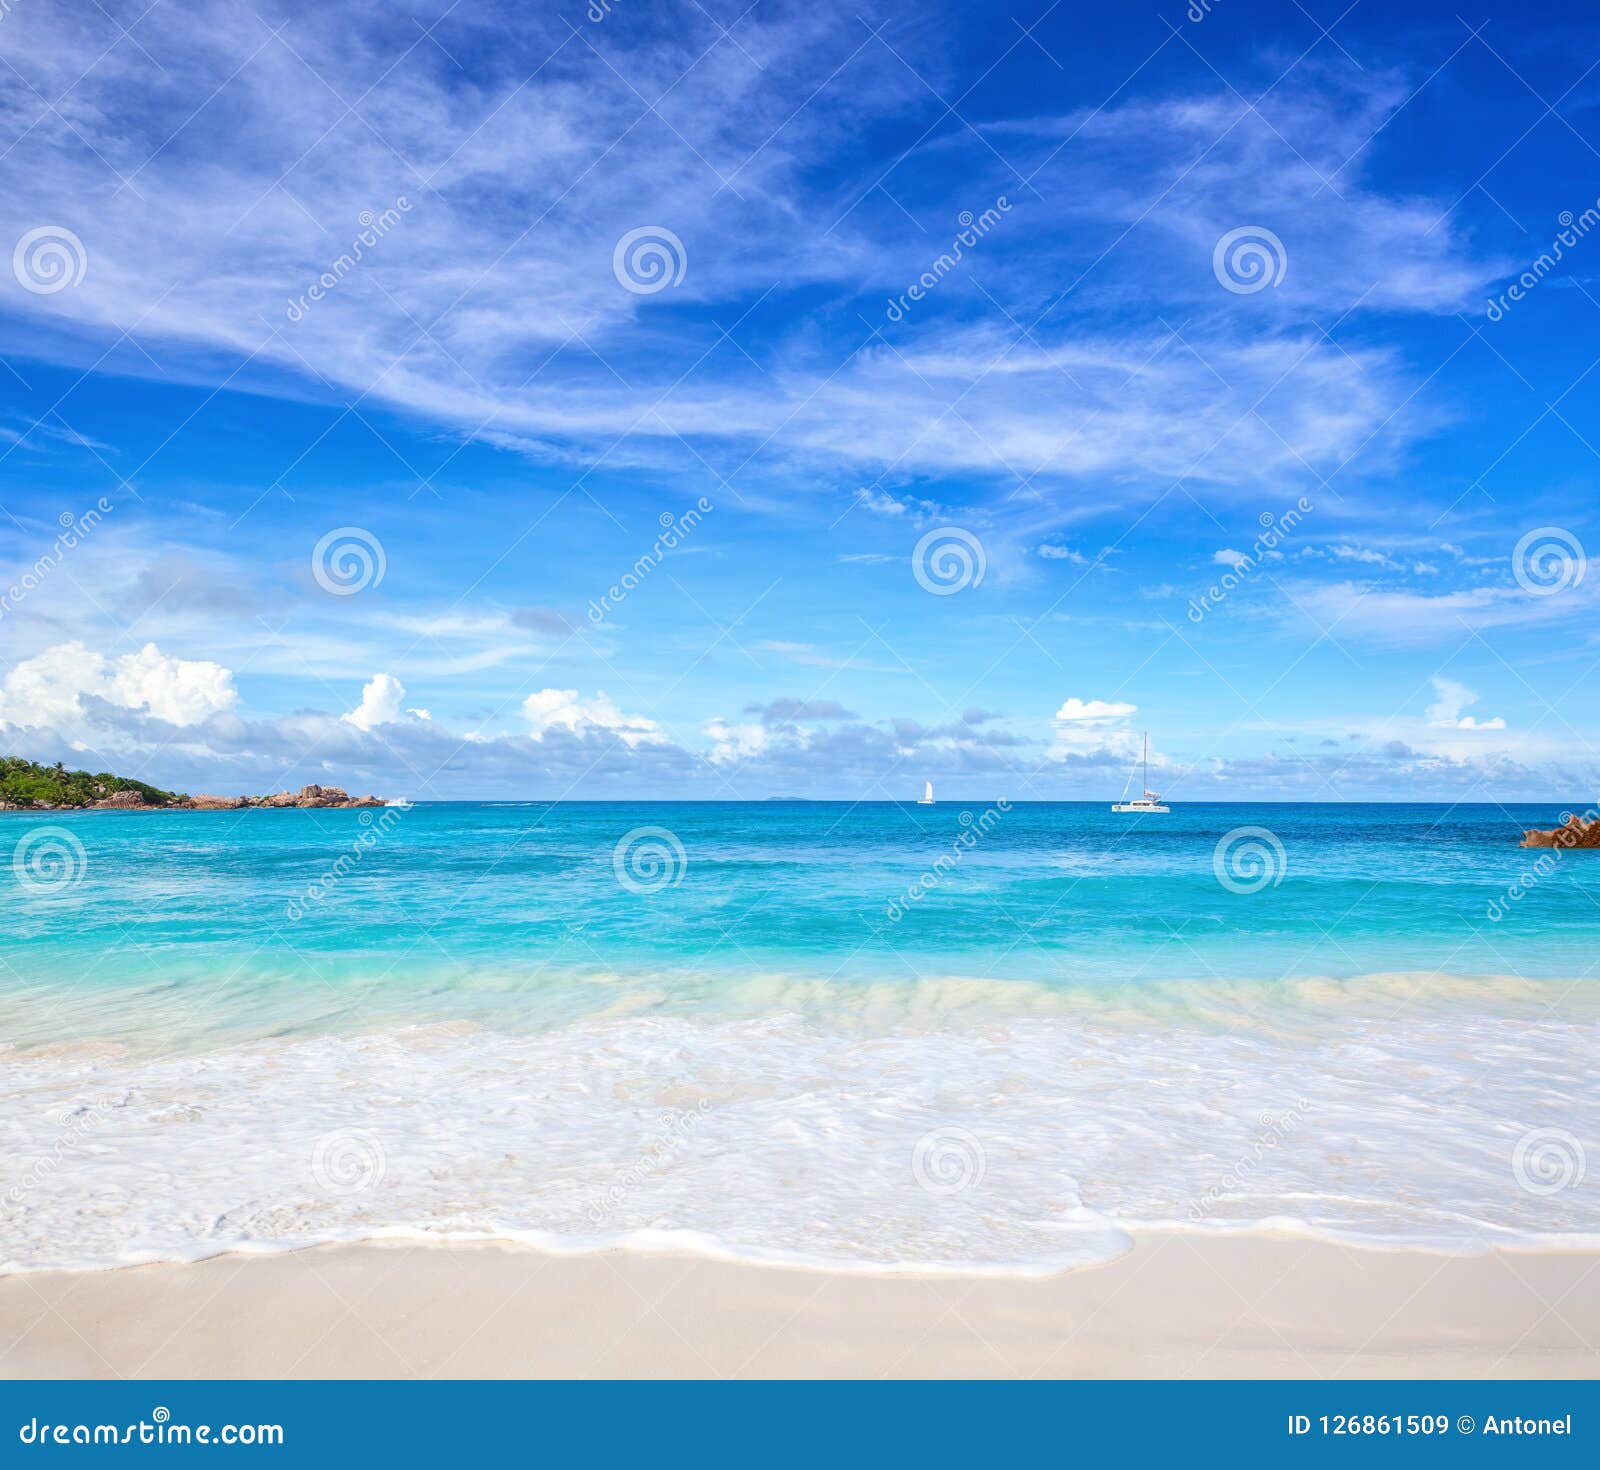 scenic seascape with white sand on the beach and ocean`s turquoise water. idyllic tropical beach scene. seychelles